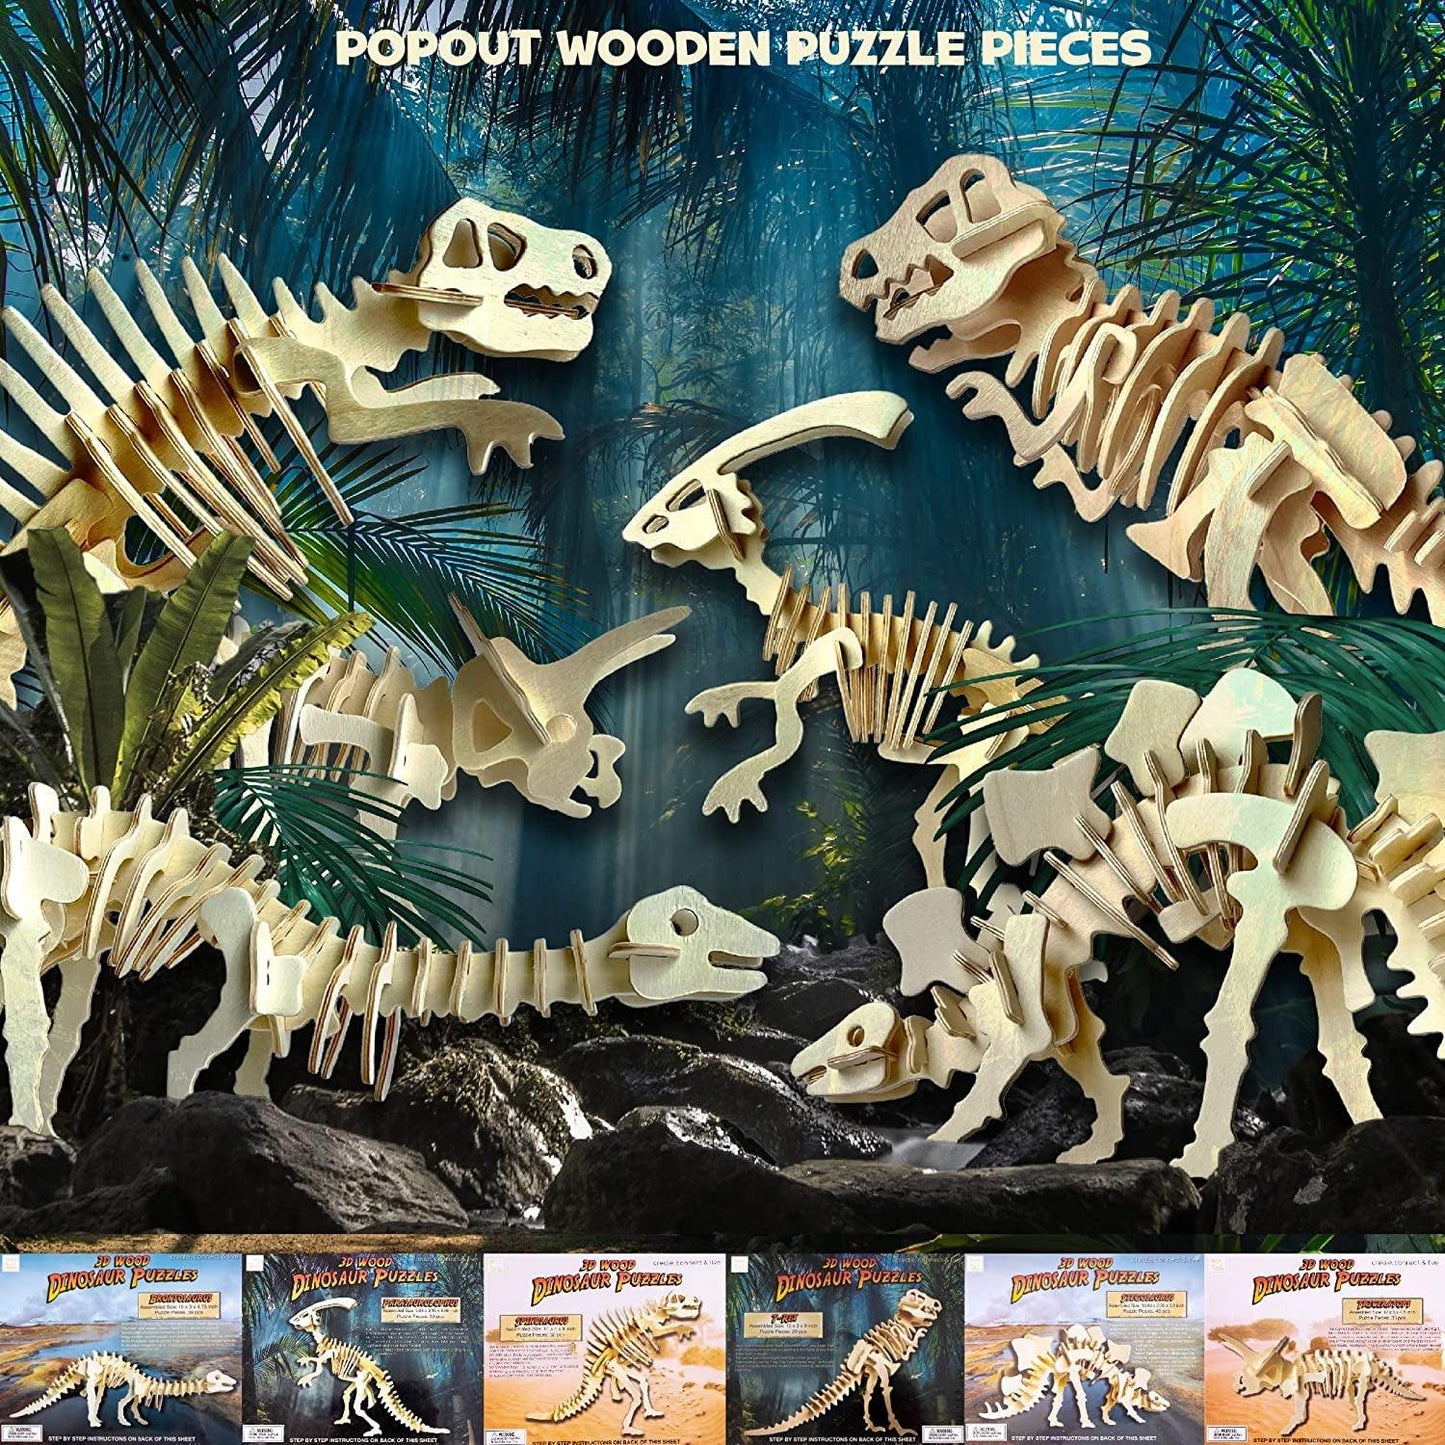 3D Wooden Dinosaur Model Puzzles (Makes 6 Dinos) Crafts for Kids Boys and Girls - WoodArtSupply